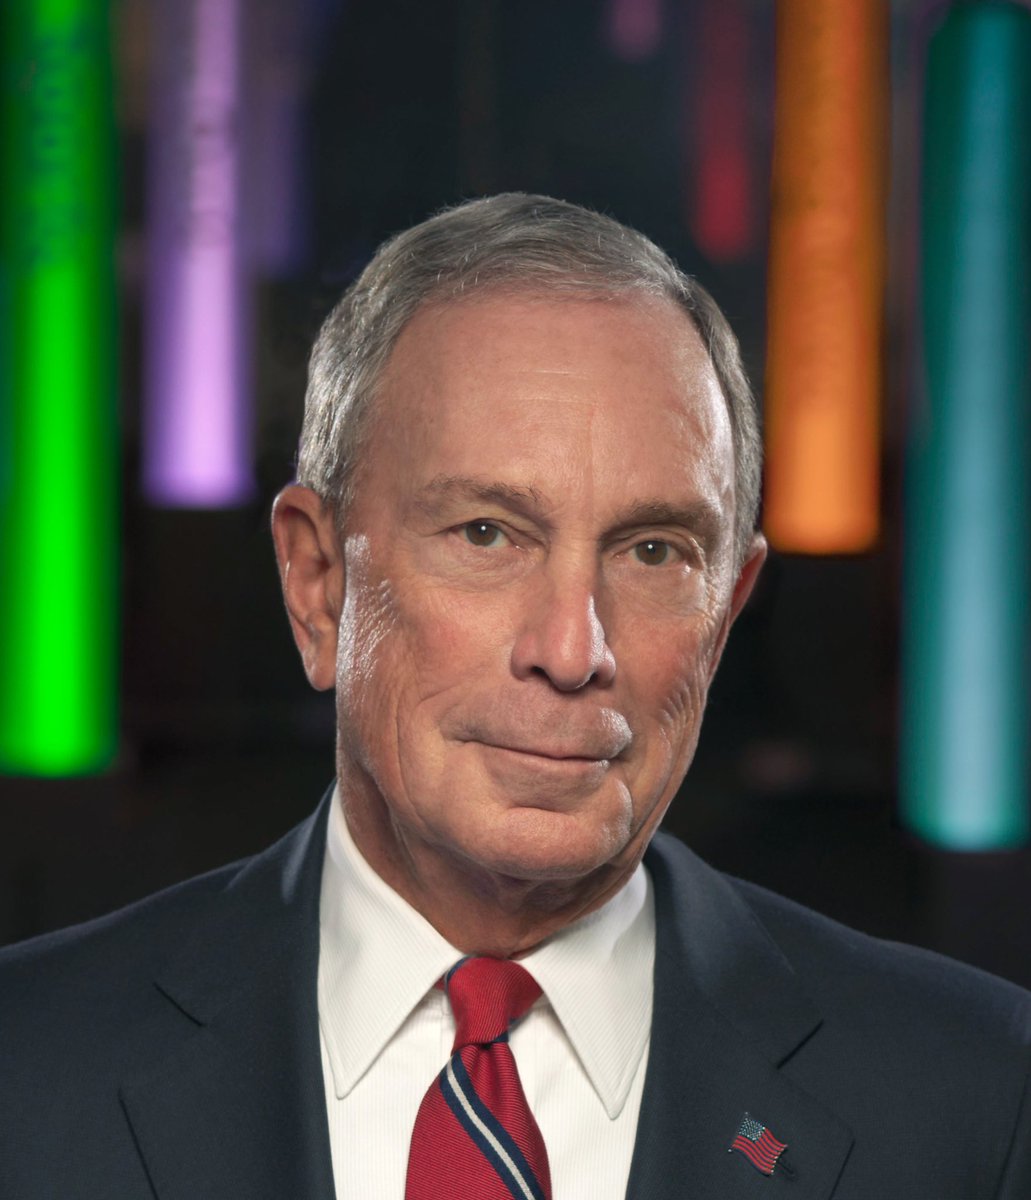 your net worth is 60 billion dollars. open your purse  @MikeBloomberg